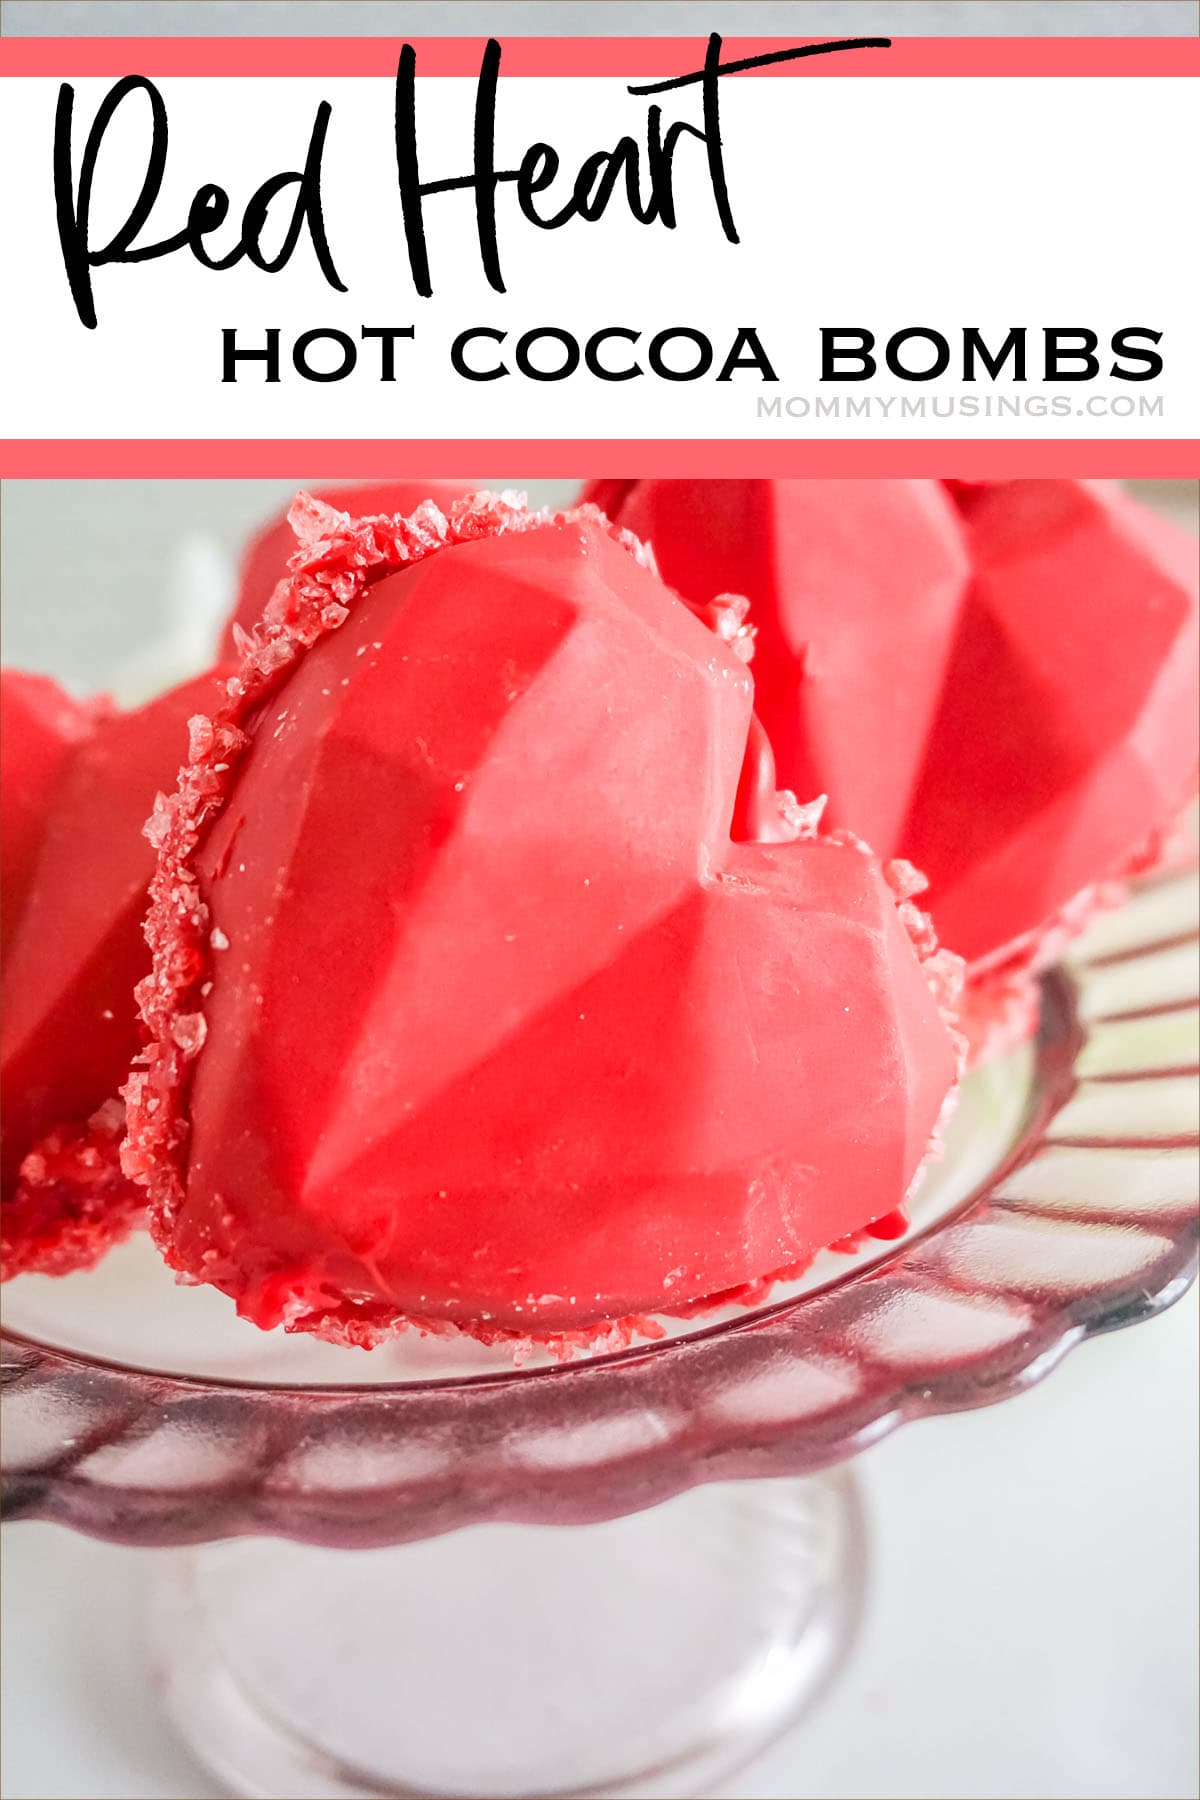 Red Heart Rock Candy Hot Cocoa Bombs with text which reads Red Heart Hot Cocoa Bombs